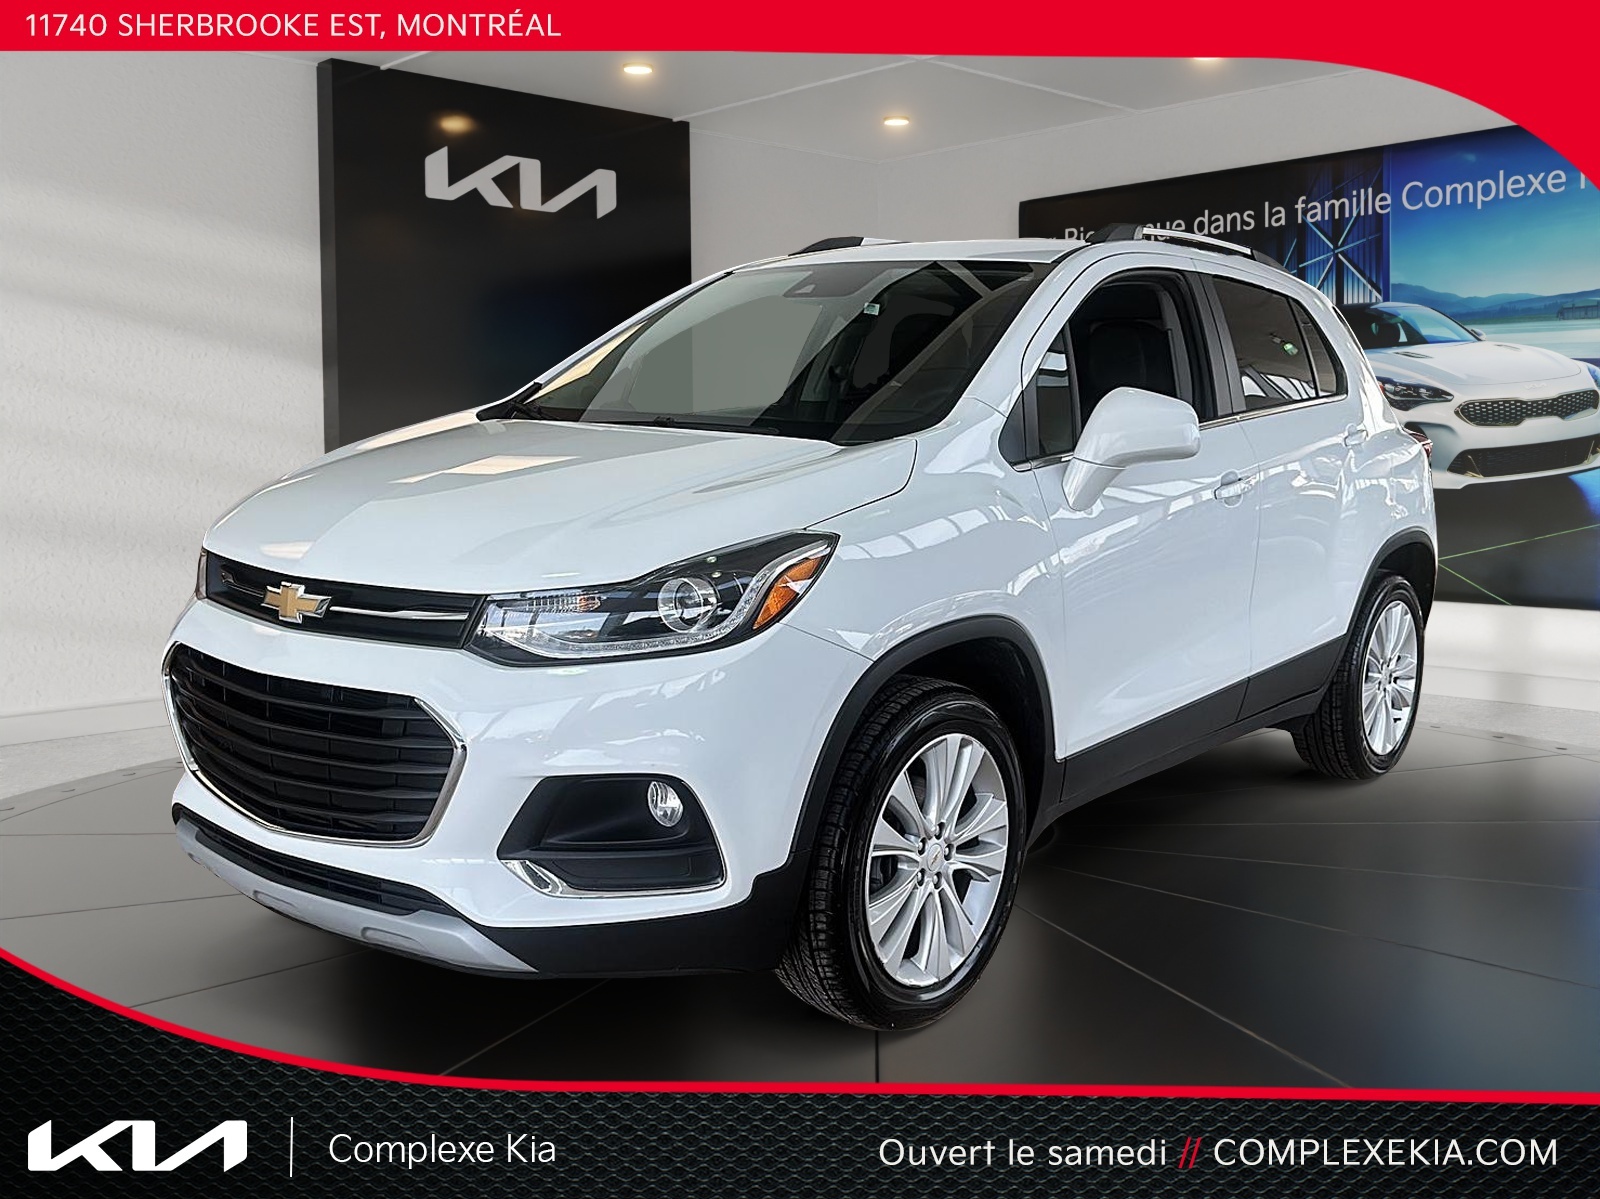 2020 Chevrolet Trax Premier AWD Cuir Toit Ouvrant S.chauffant Mags